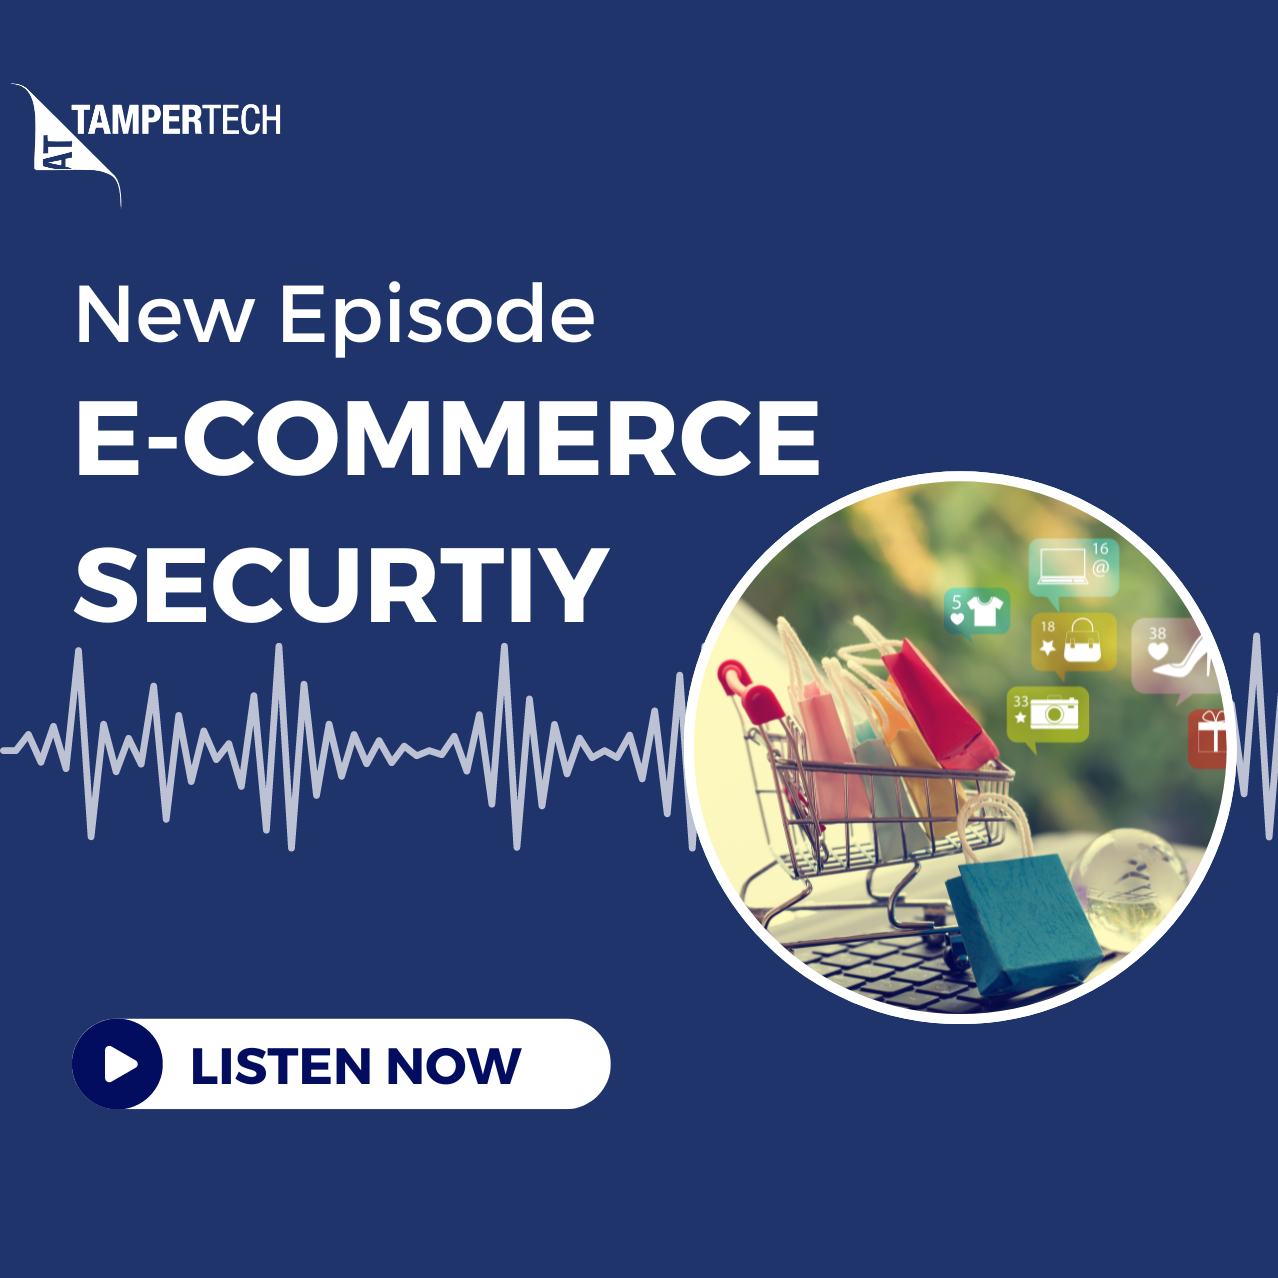 Sticky subjects: How can tamper evidence protect E-commerce stores and customers